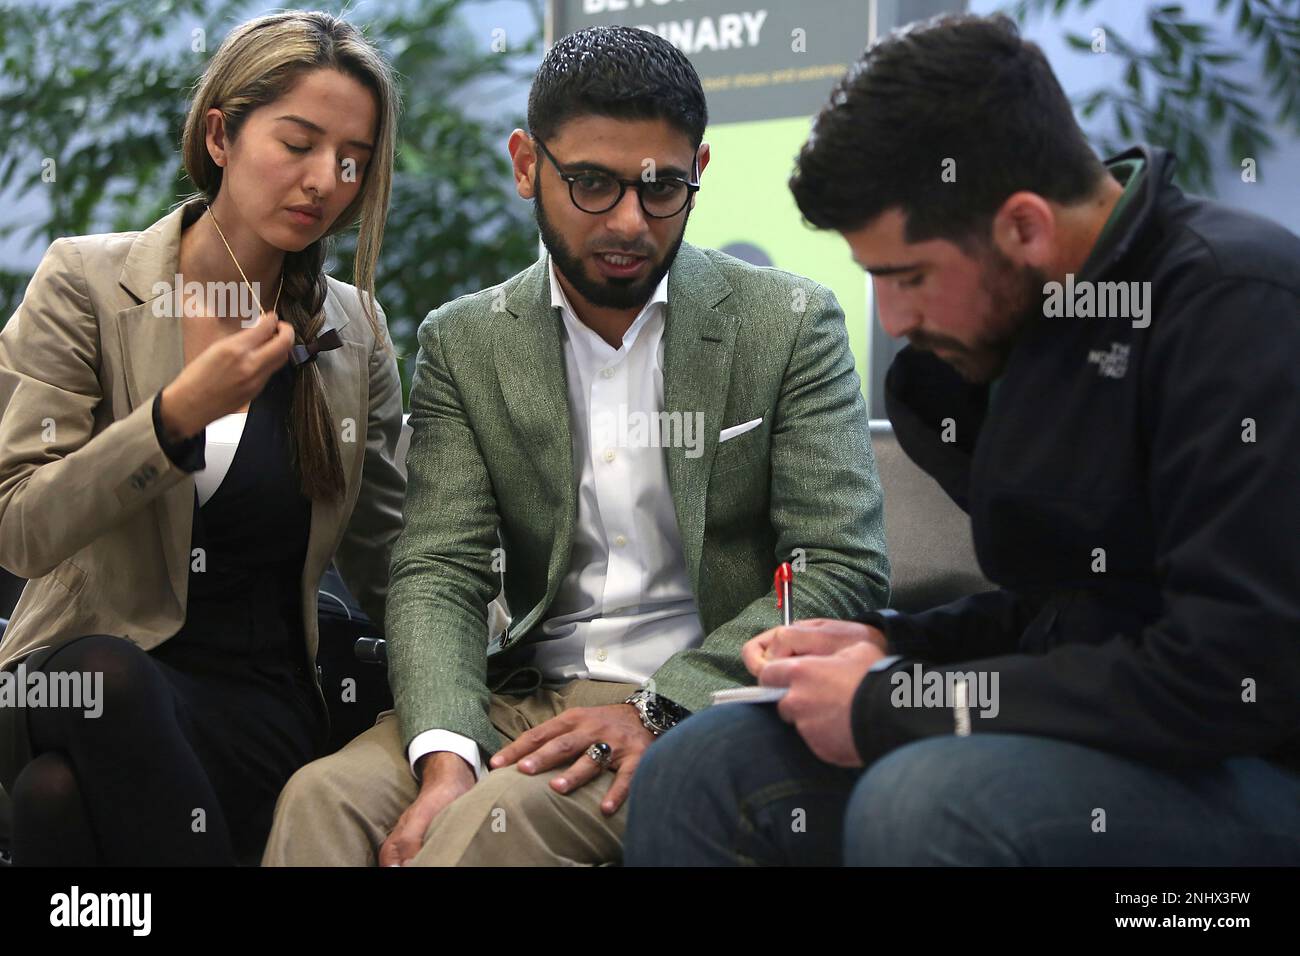 Attorney Nasrina Bargzie (left) and Mokhtar Alkhanshali (right) of Mocha  Mill talk with Chronicle reporter Hamed Aleaziz after arriving at SFO  International airport in South San Francisco, California, after a three day